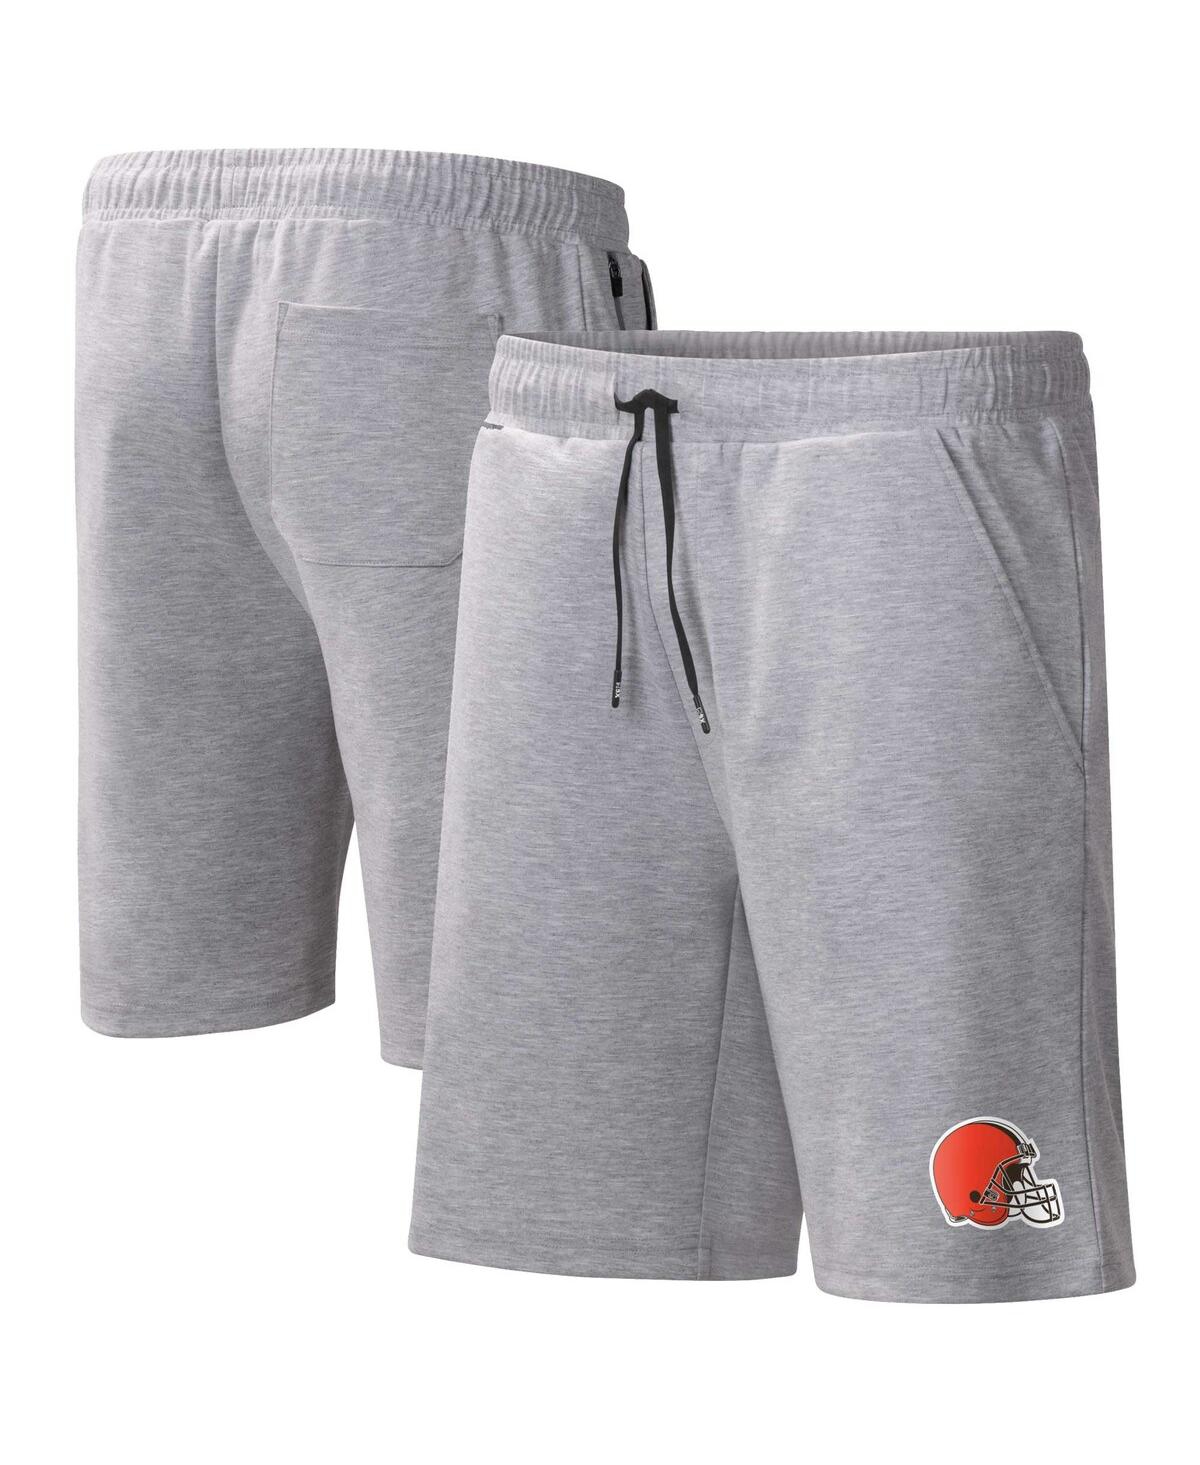 Men's Msx by Michael Strahan Heather Gray Cleveland Browns Trainer Shorts - Heather Gray